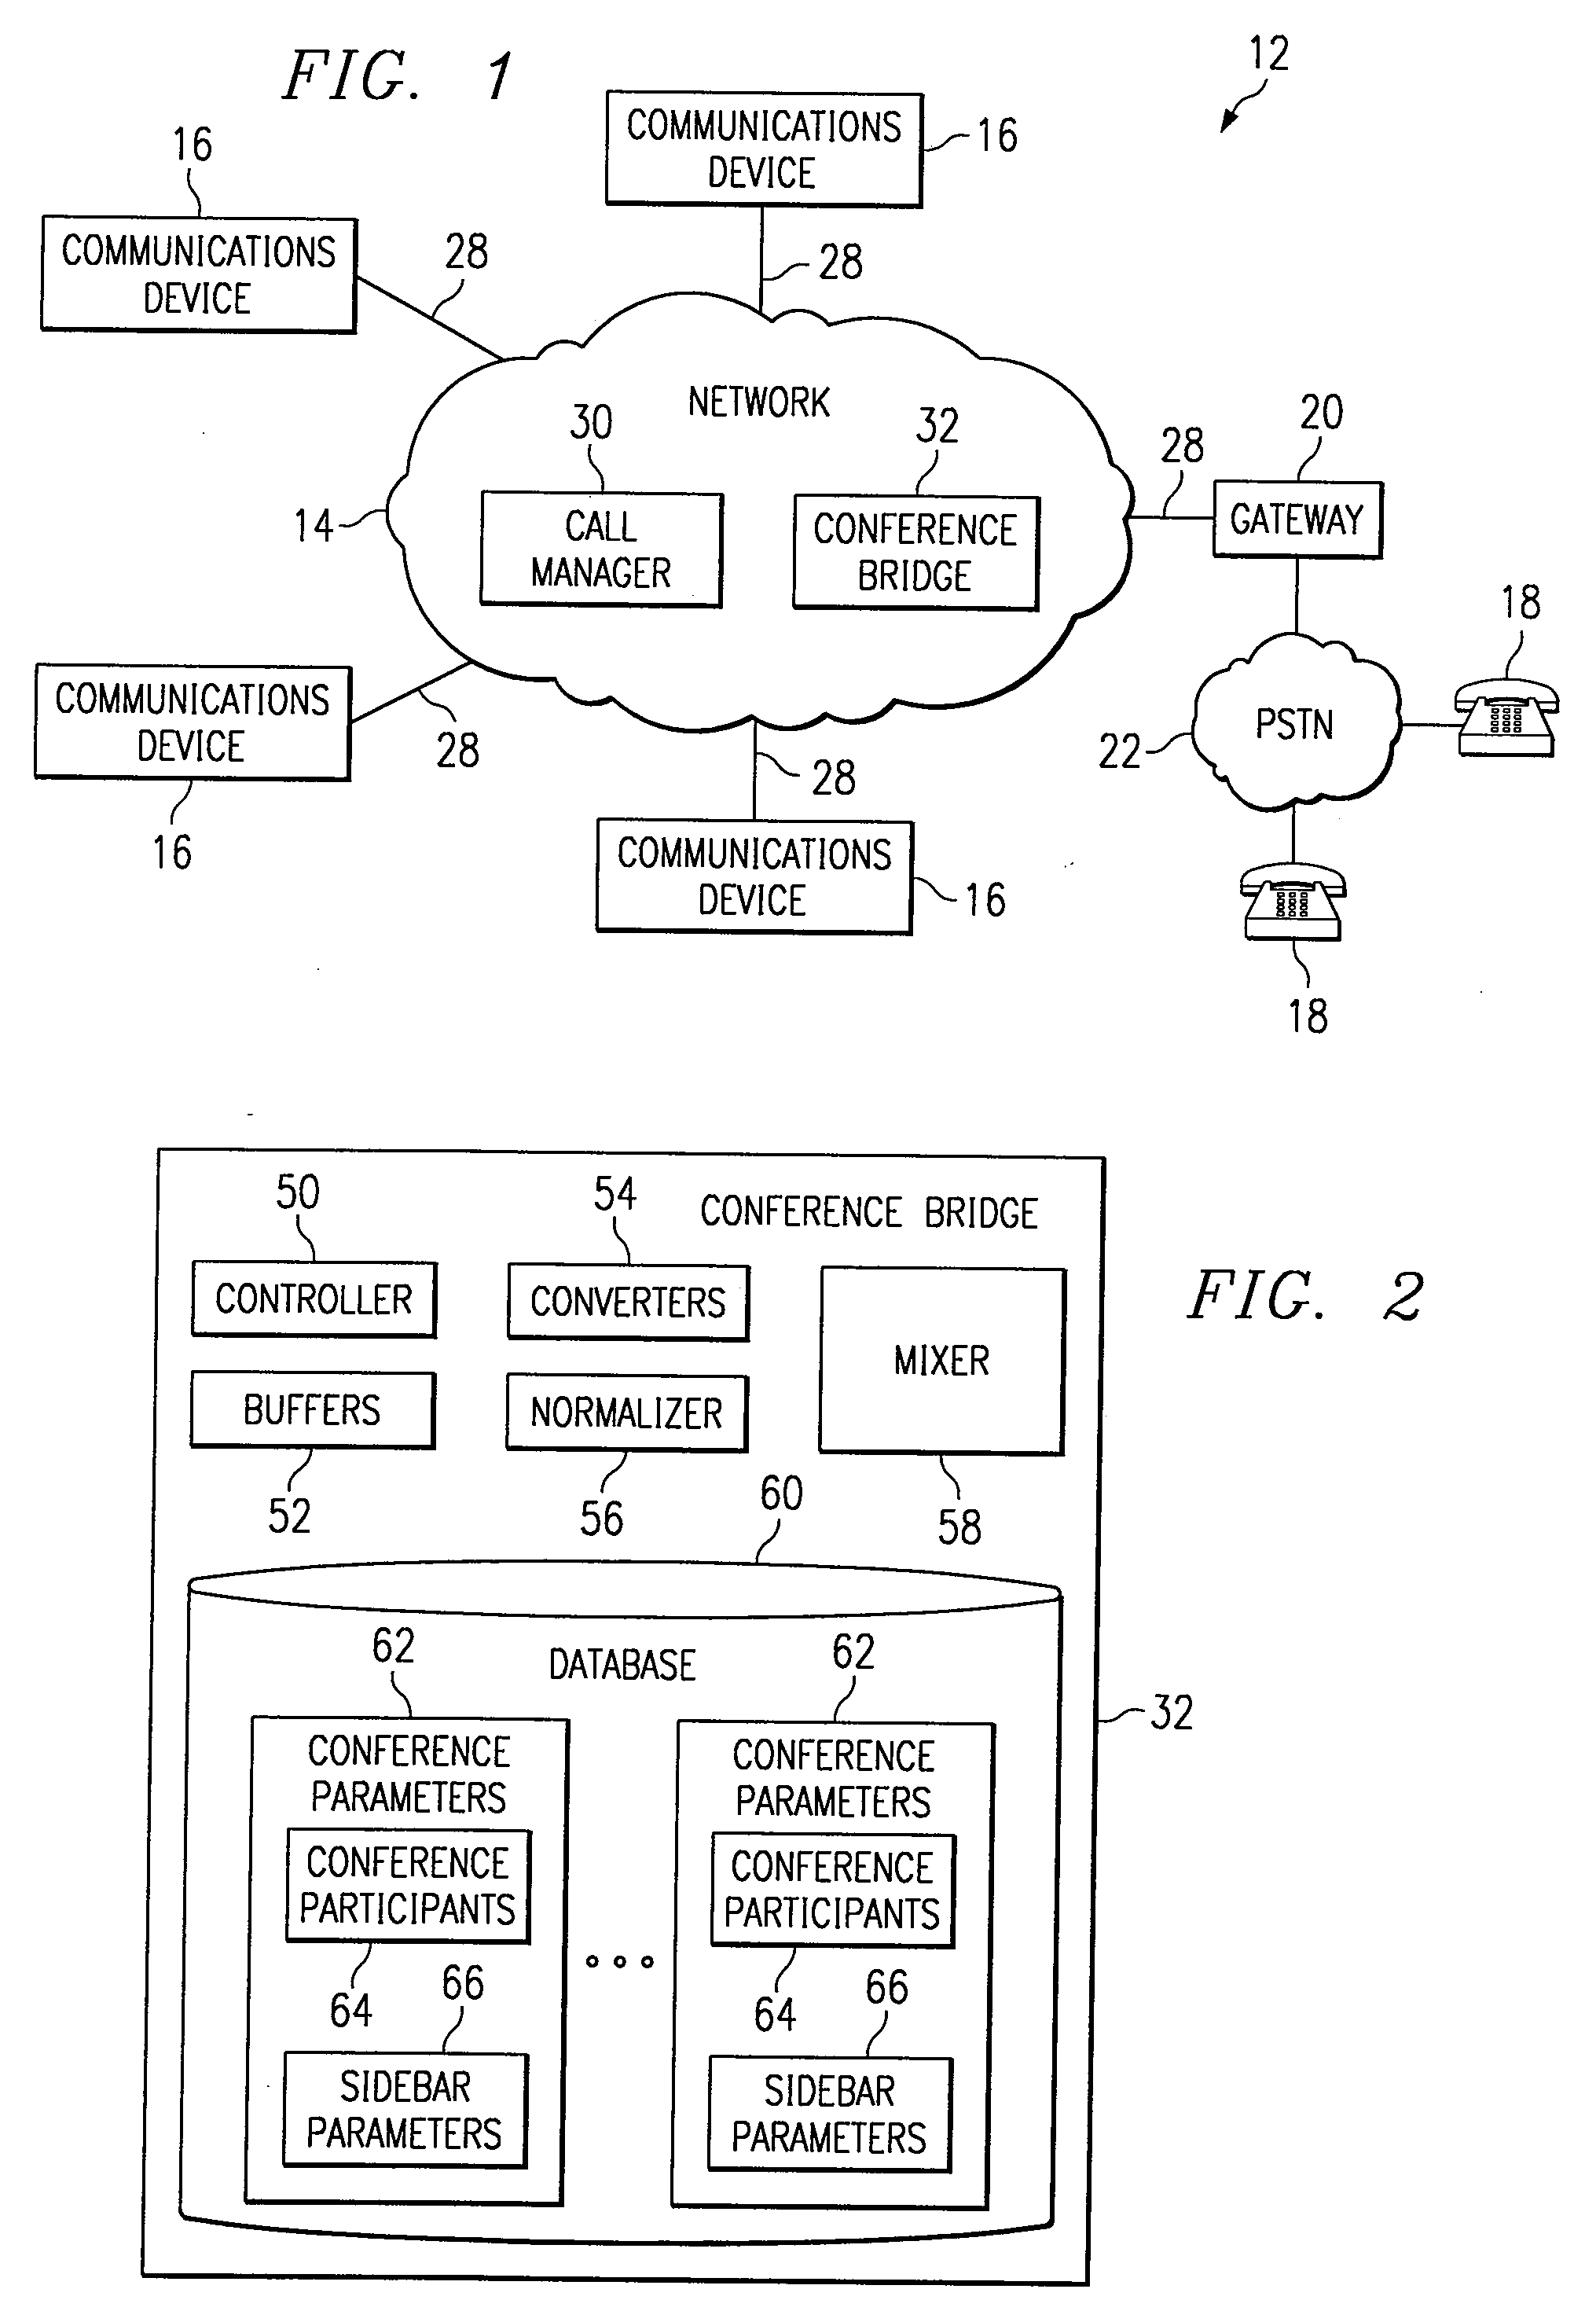 Method and System for Participant Control of Privacy During Multiparty Communication Sessions